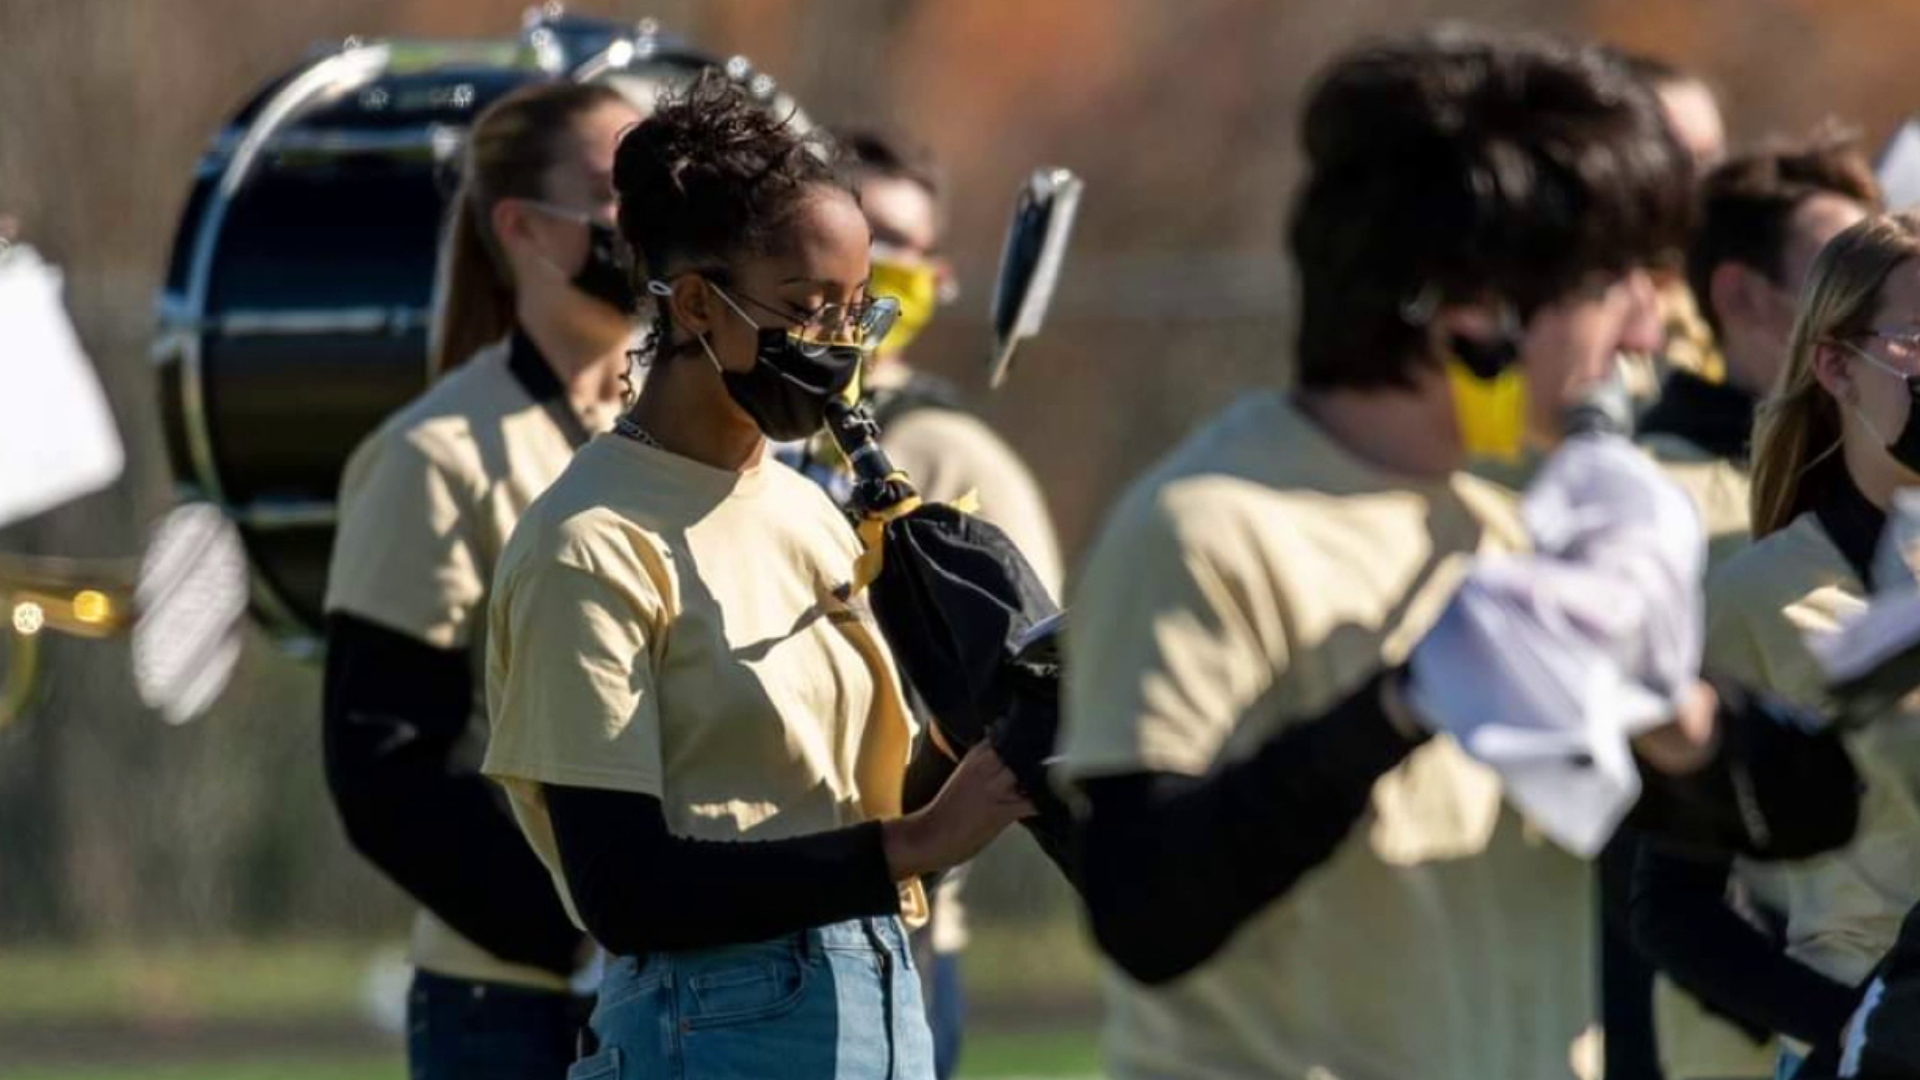 Western Wayne's marching band prevents the spread of germs with special handmade covers and masks.